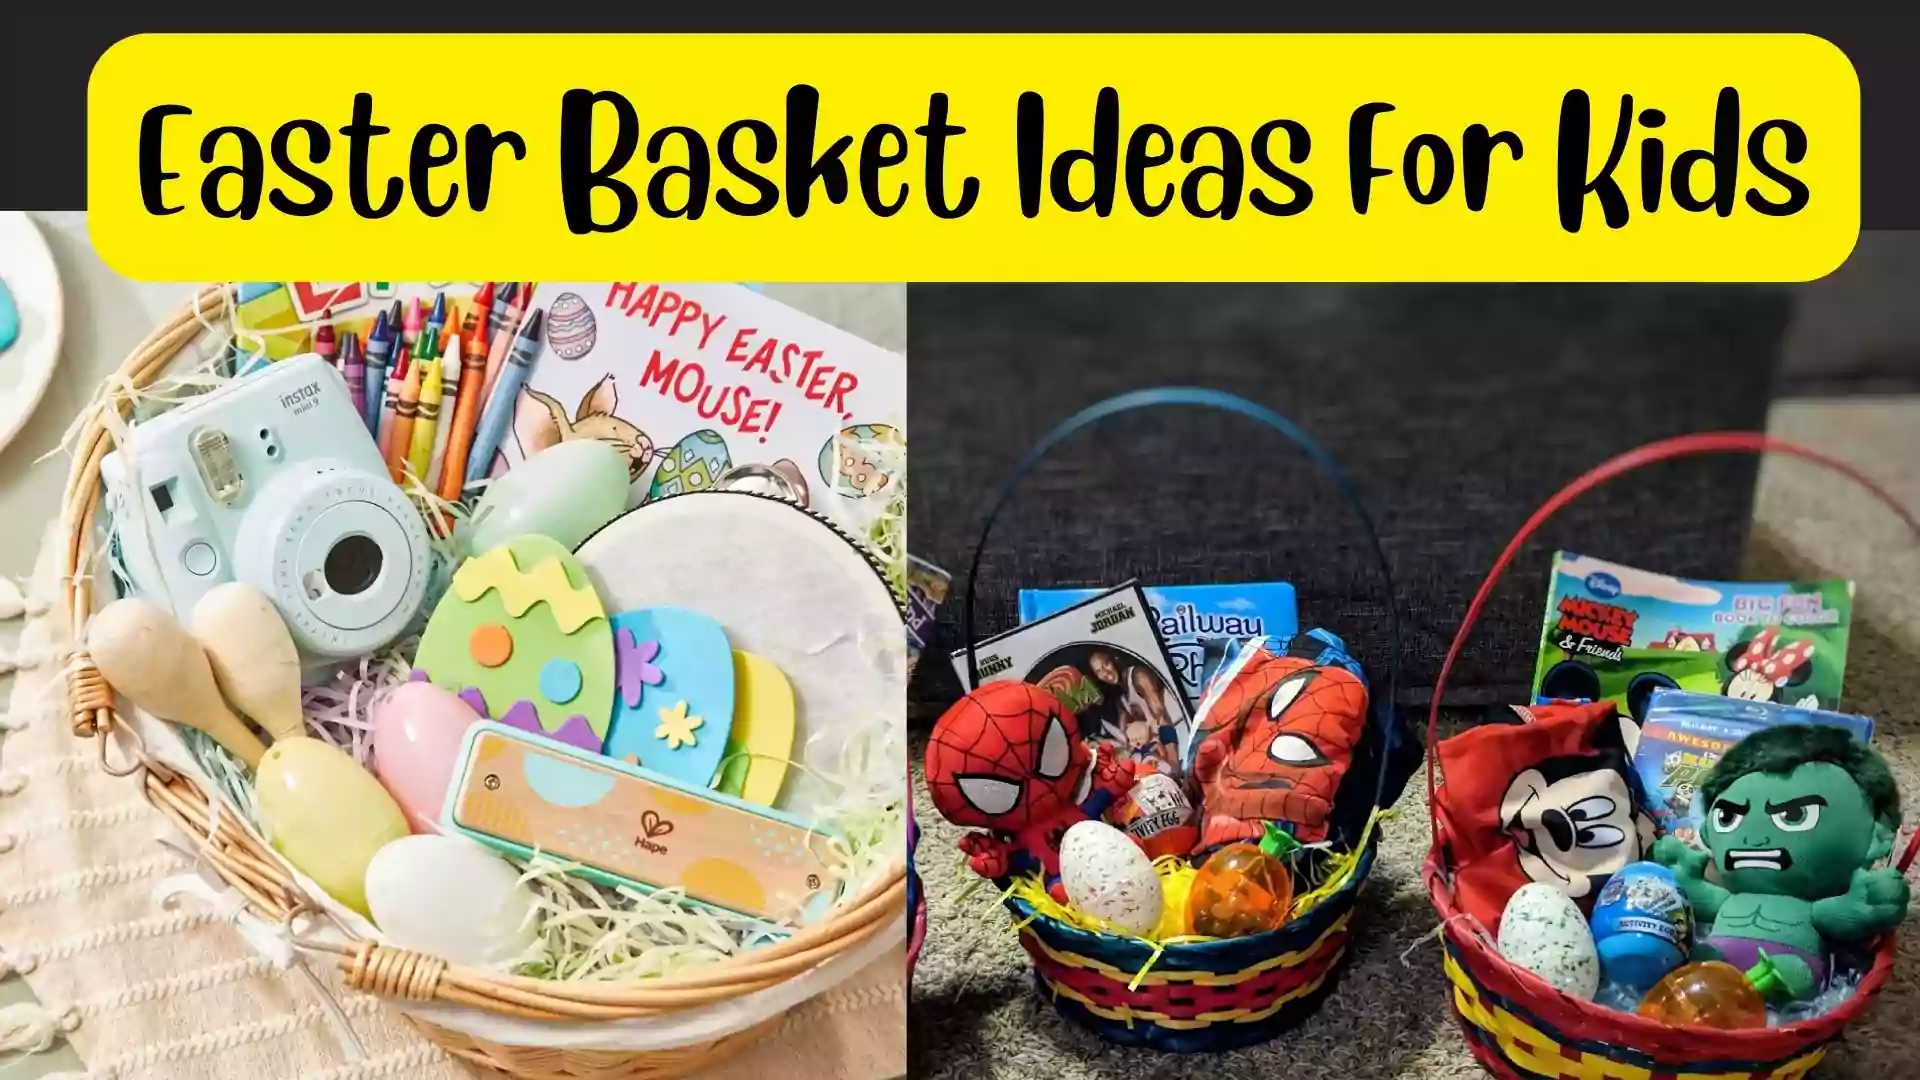 Easter Basket Ideas For Kids wallpaper and images | Easter 2022